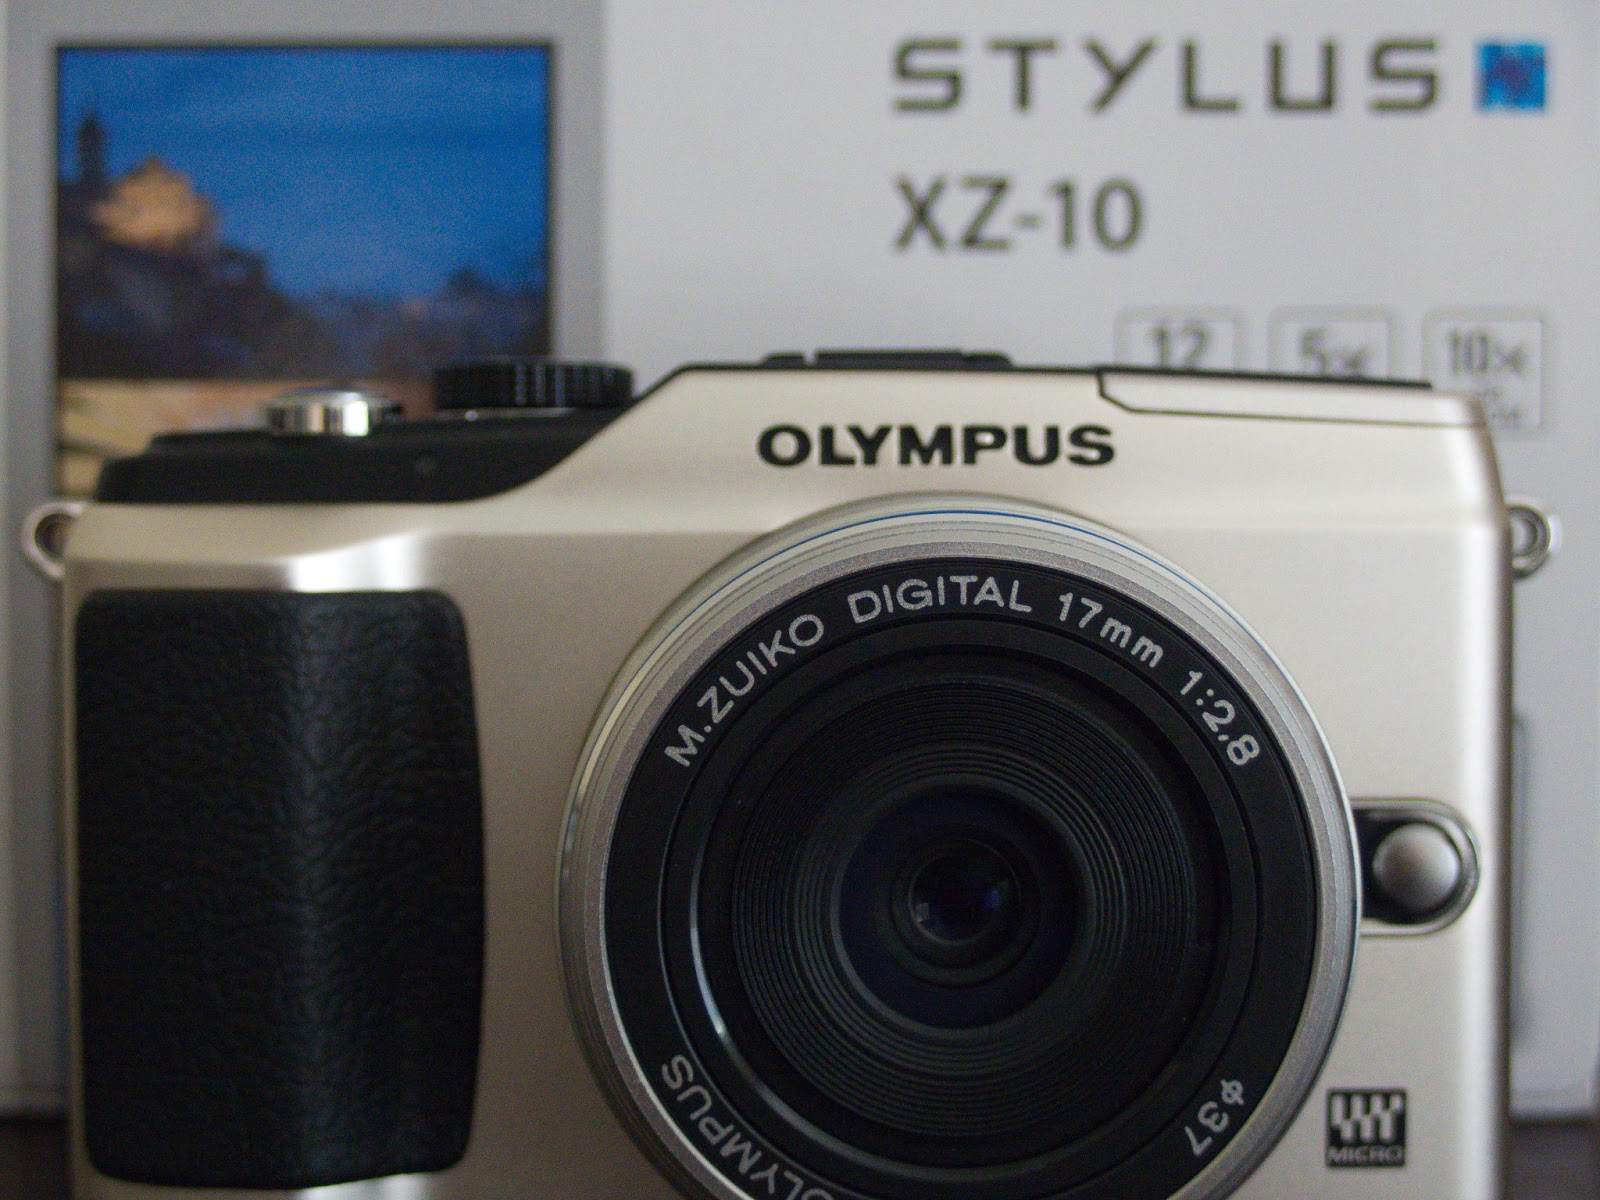 PHOTOGRAPHIC CENTRAL: Olympus Stylus XZ-10 Review